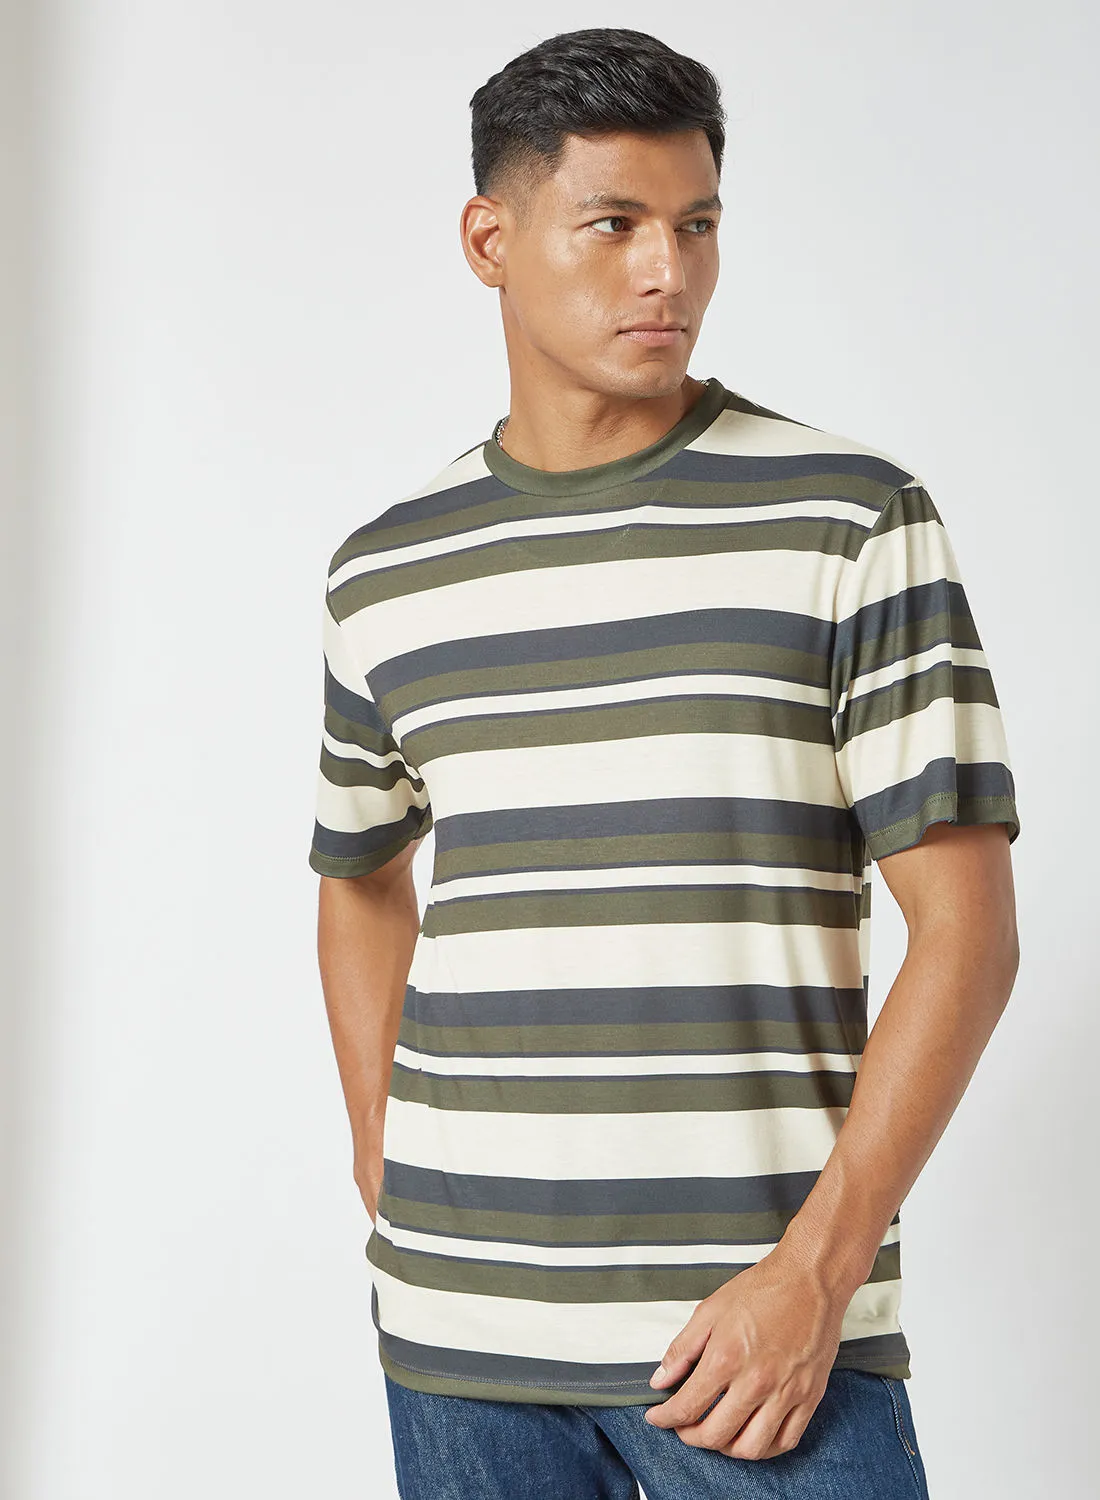 STATE 8 Text Print Striped T-Shirt Multicolour